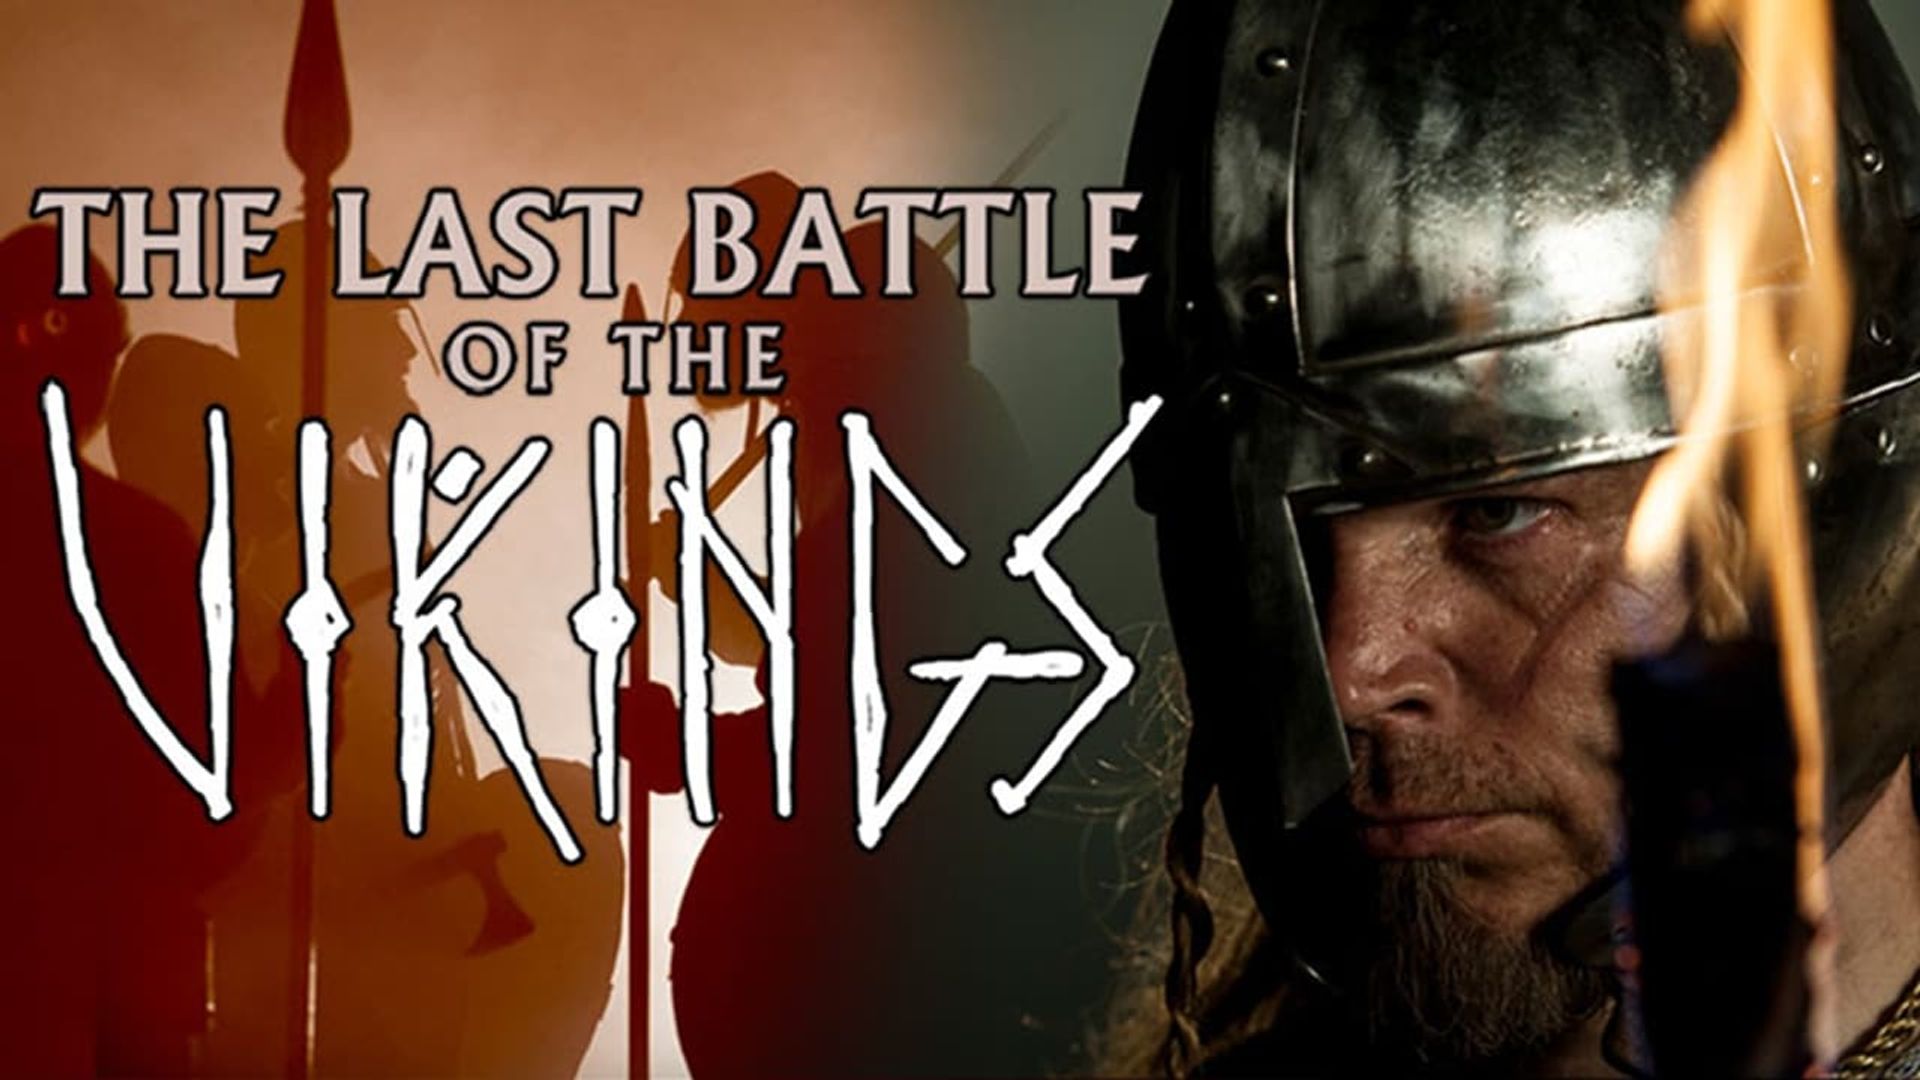 The Last Battle of the Vikings background